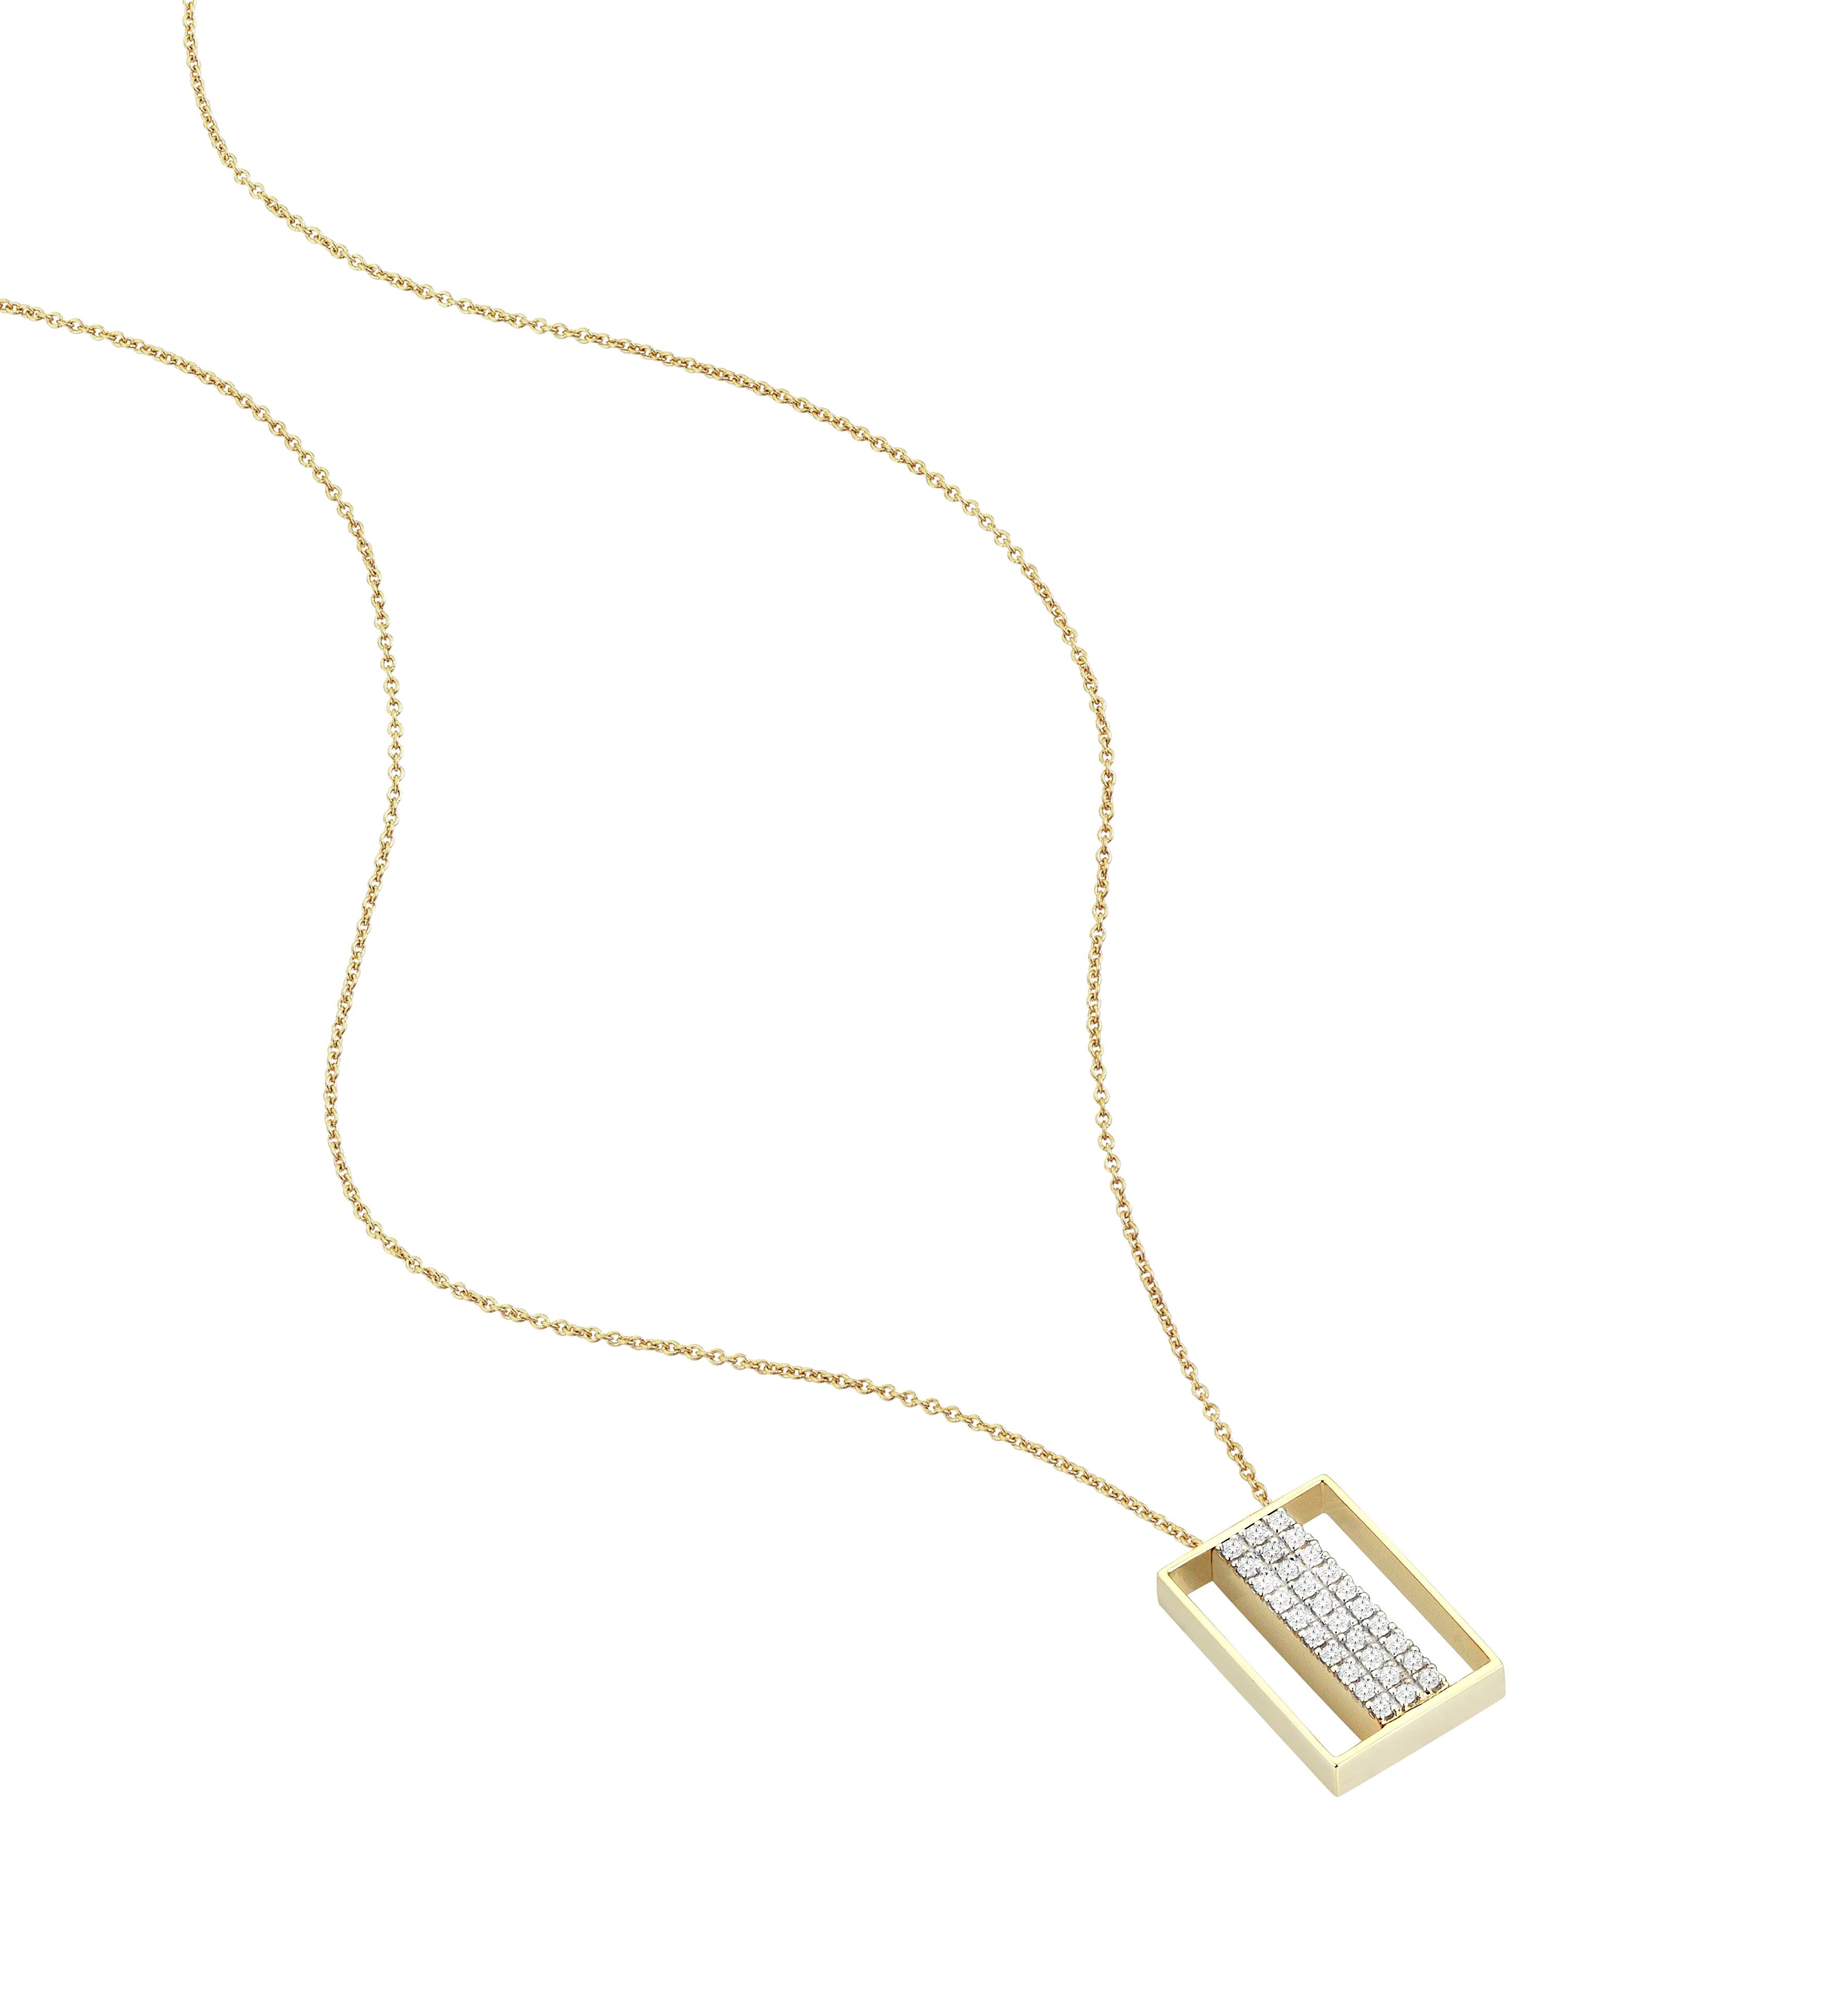 Pave Rectangular Necklace in Yellow Gold - Her Story Shop